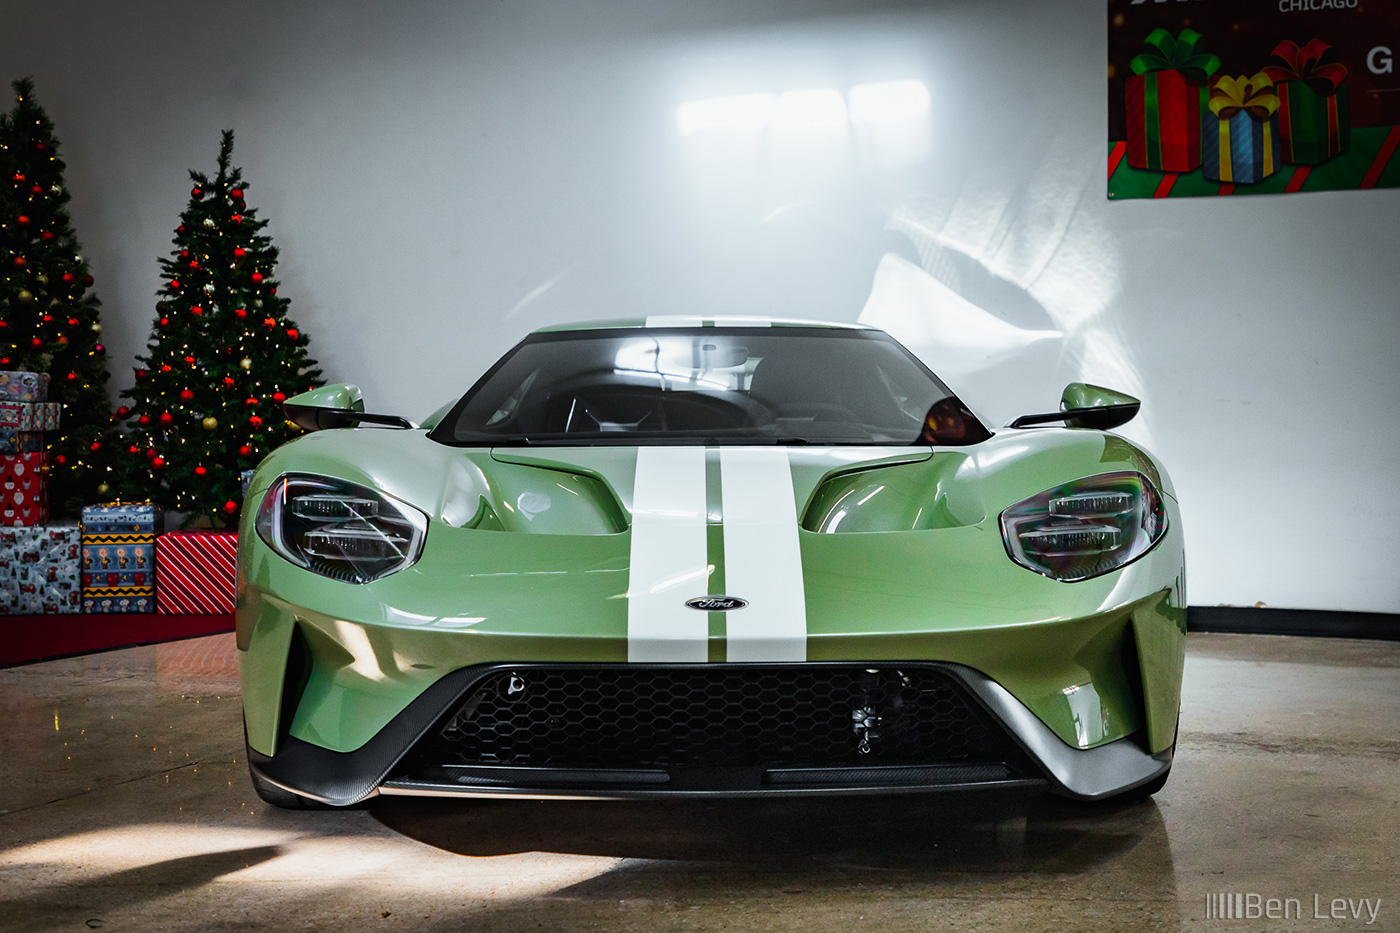 Front of Green 2017 Ford GT